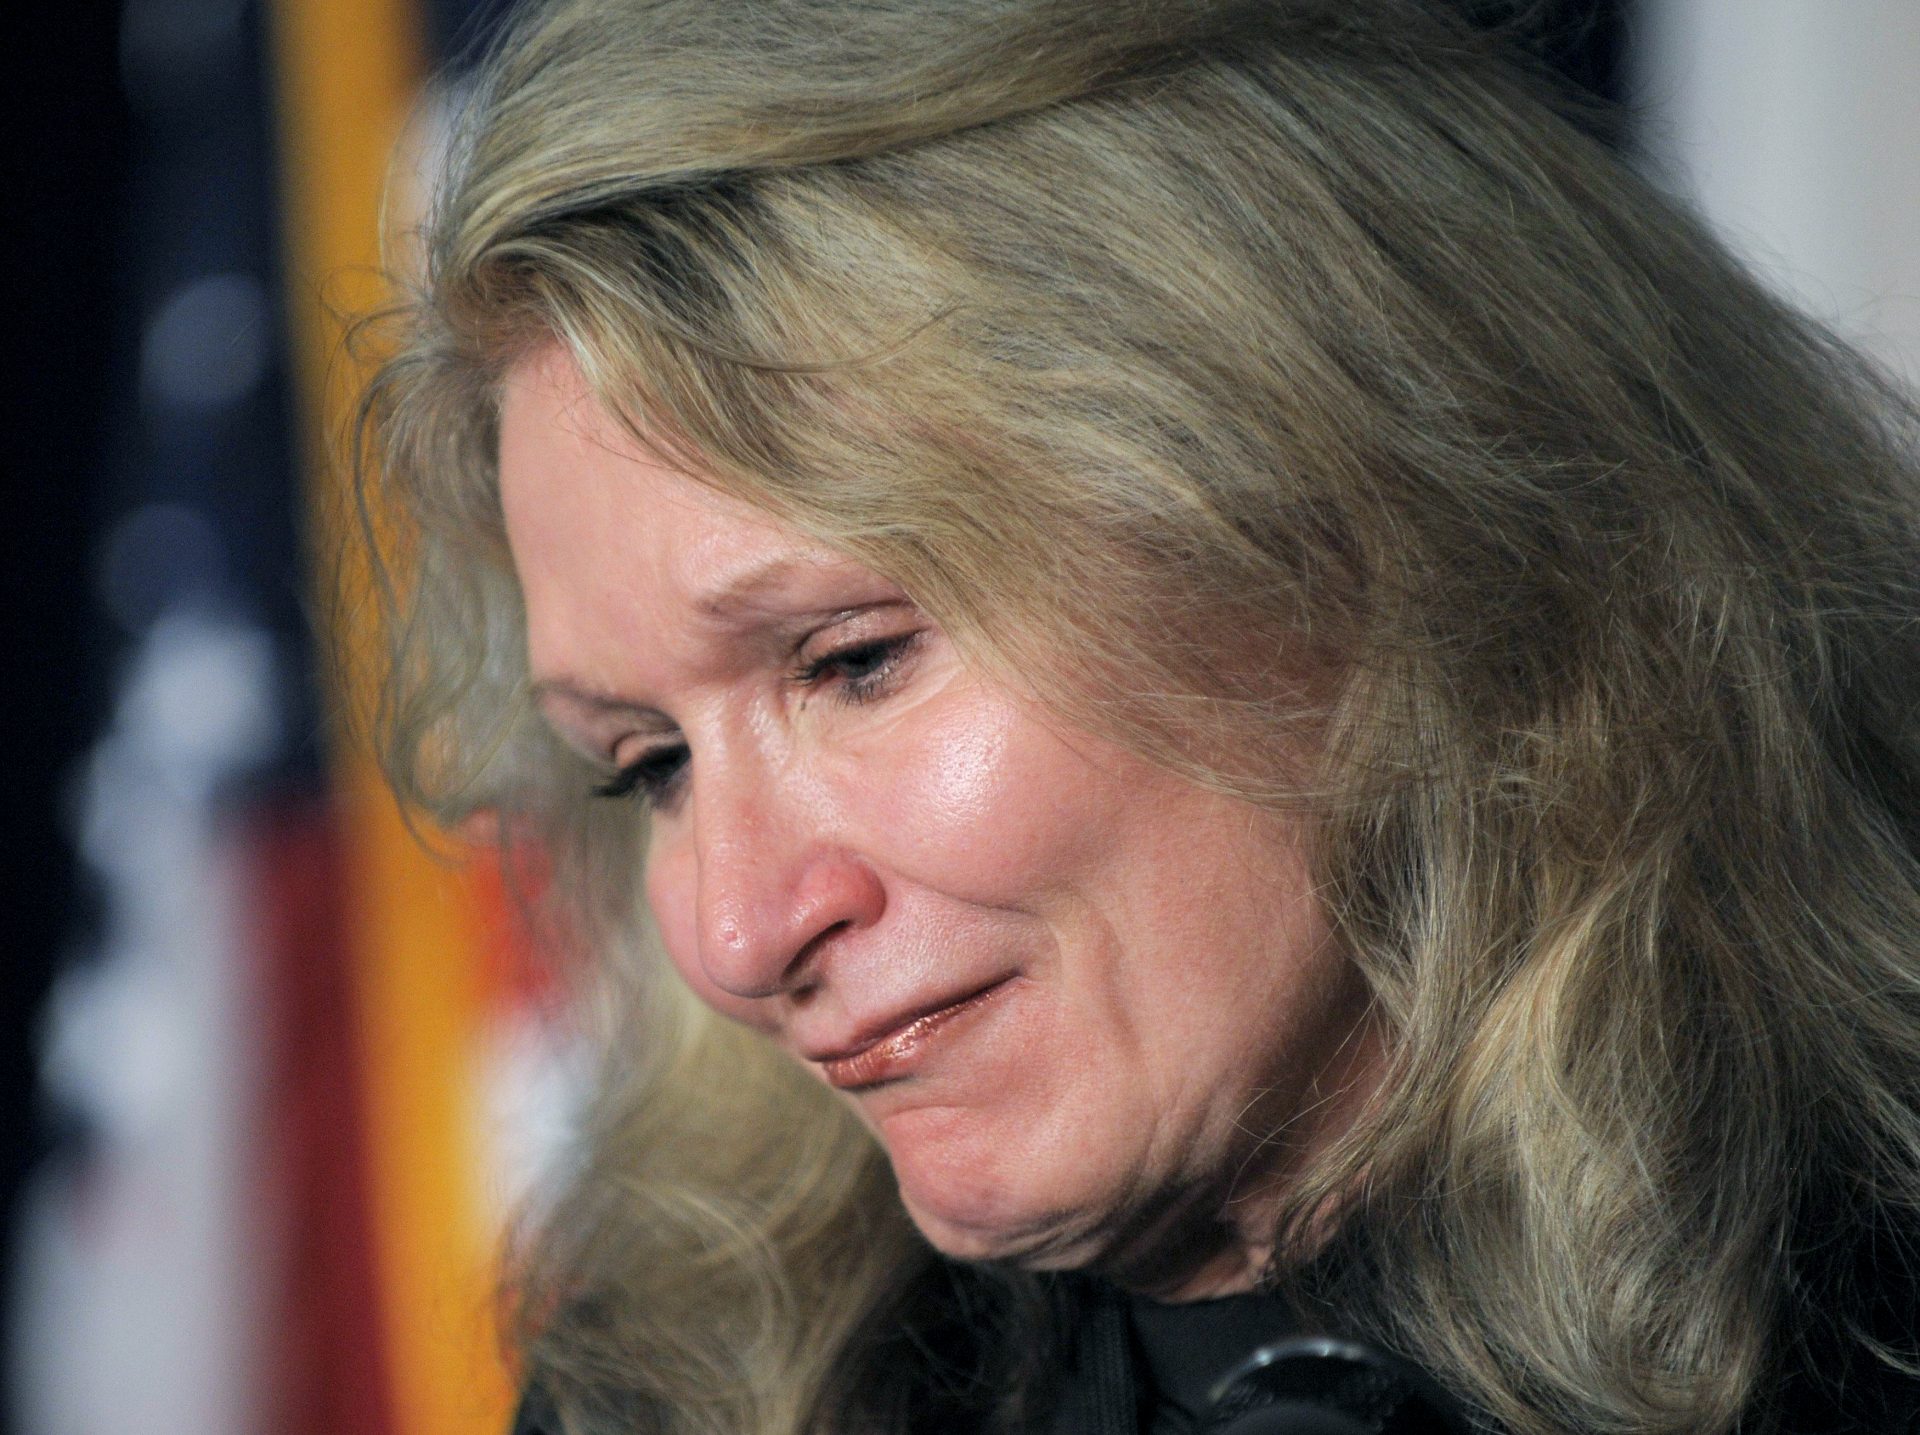 In this Dec. 8, 2008, file photo, Alice Hoagland, the mother of 9/11 victim Mark Bingham, speaks during a news conference following a pretrial session for Khalid Sheikh Mohammed and his four co-defendants in Camp Justice on the U.S. Naval Base in Guantanamo Bay, Cuba. Hoagland, beloved as a mother figure by players in the global gay rugby movement her own son Mark Bingham helped establish shortly before he perished as one of the heroes of Flight 93, died Dec. 22, 2020, in her sleep at her home in California after battling Addison’s disease.